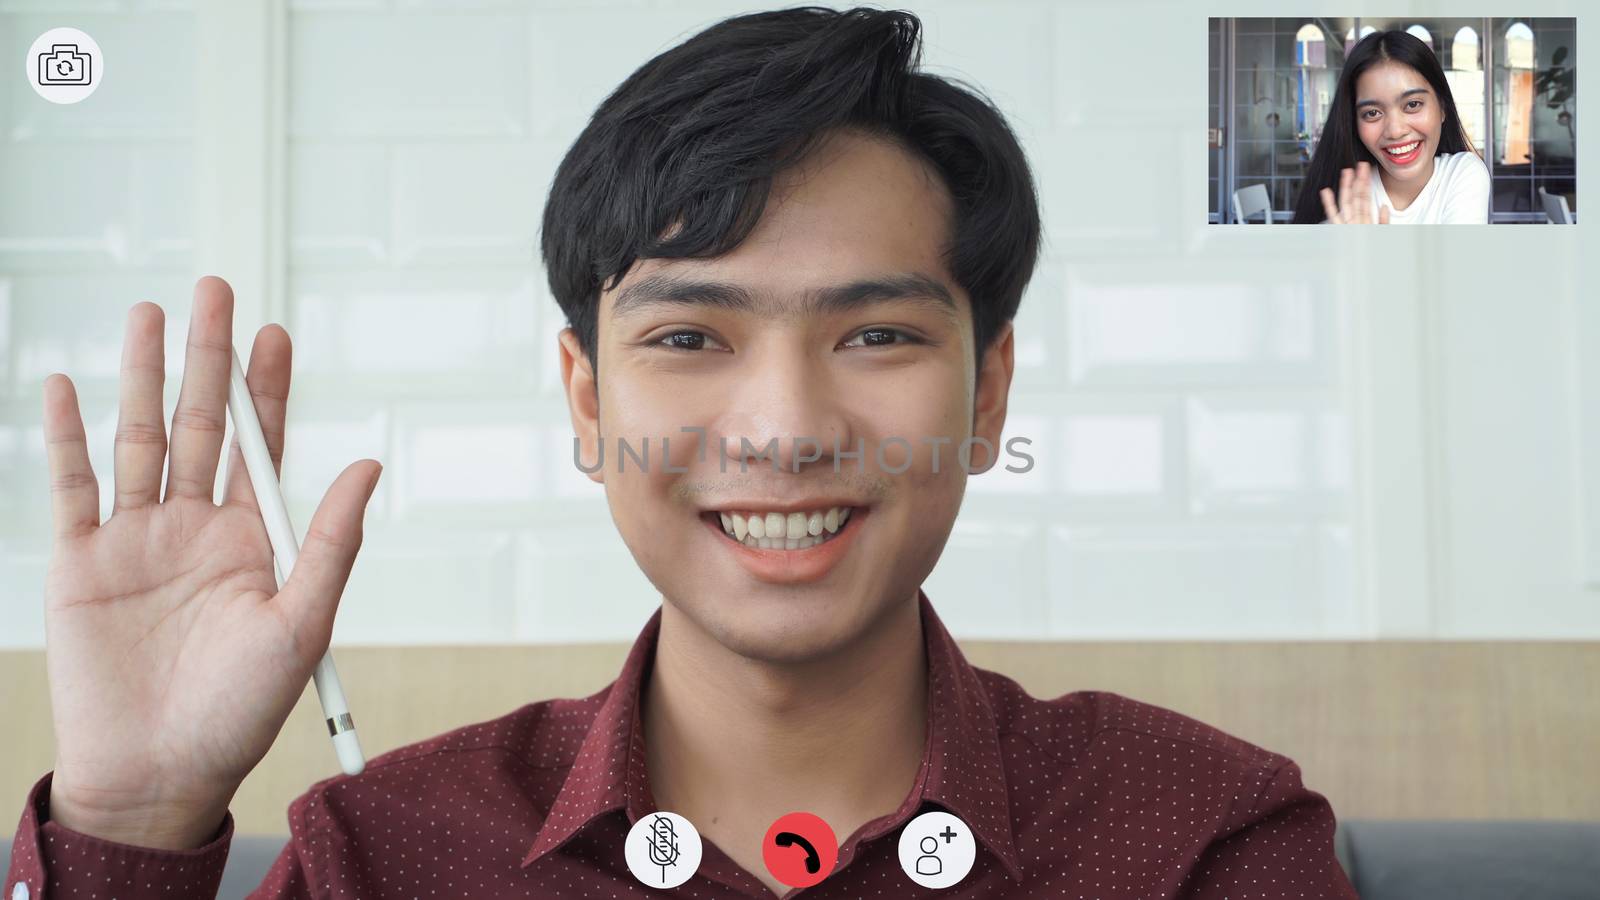 Video call screen shot the faces of Asian colleagues or partners by Boophuket